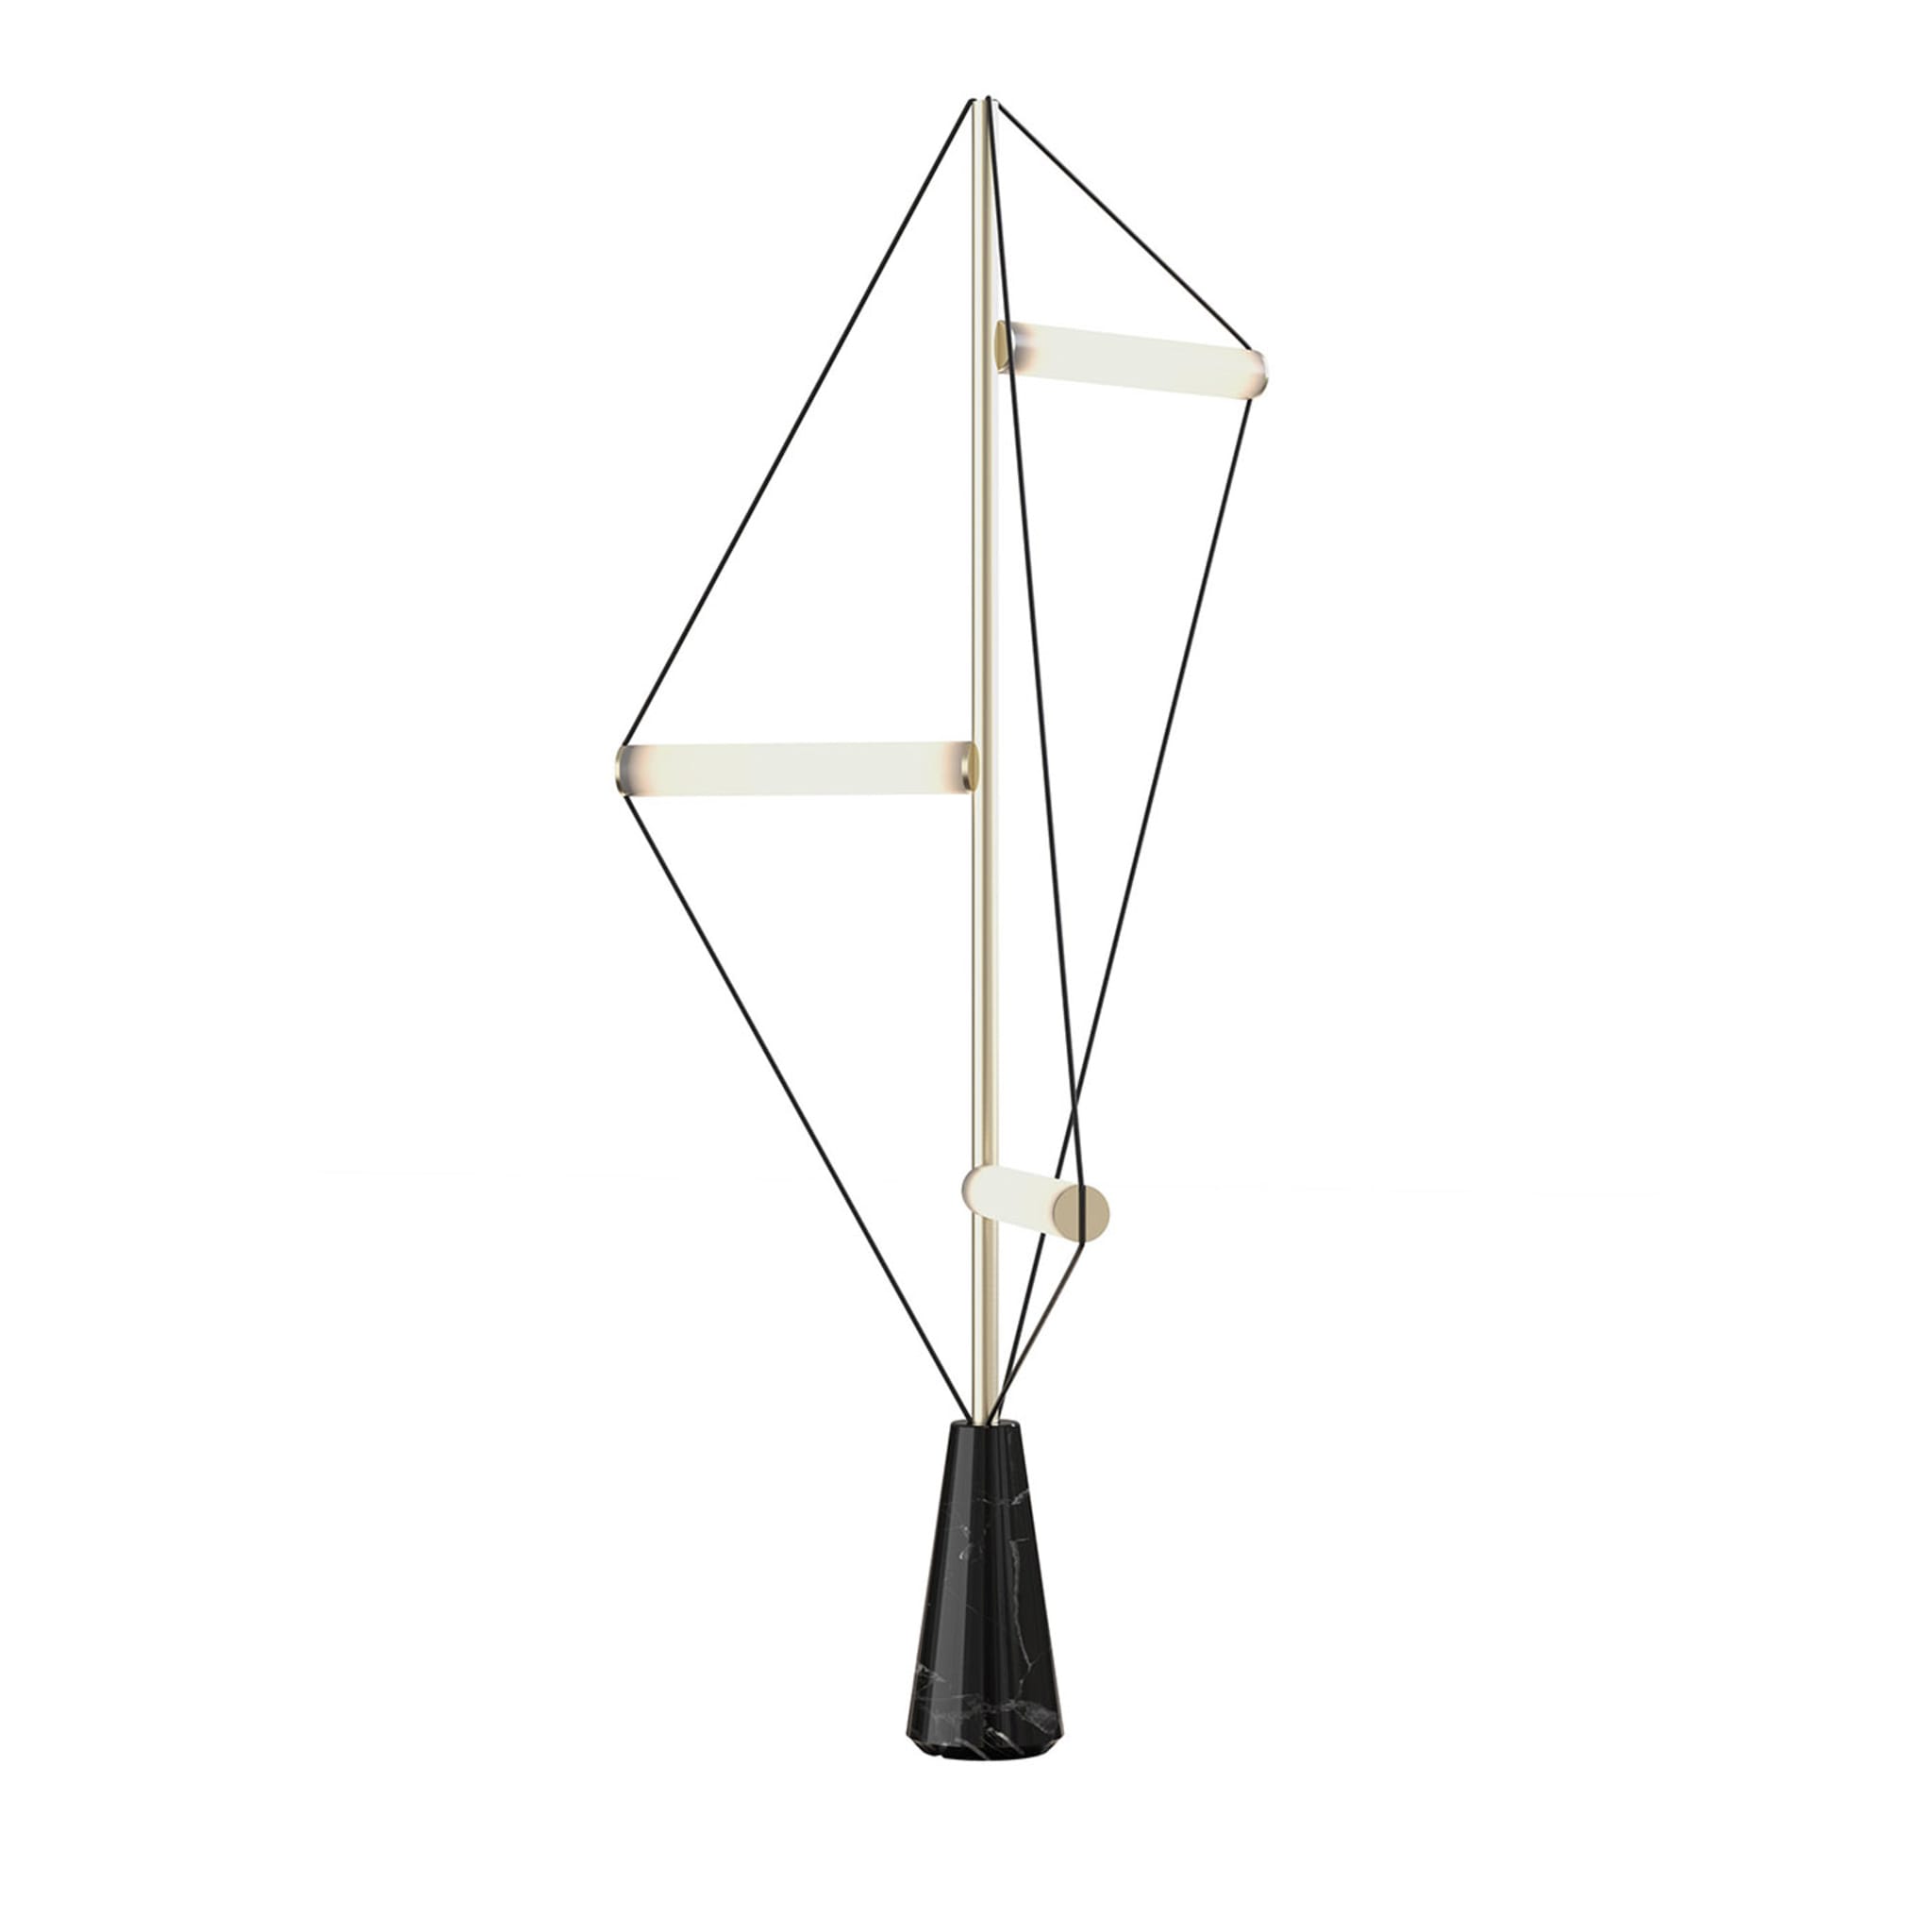 Ed047 Brass Floor Lamp with Black Base - Main view